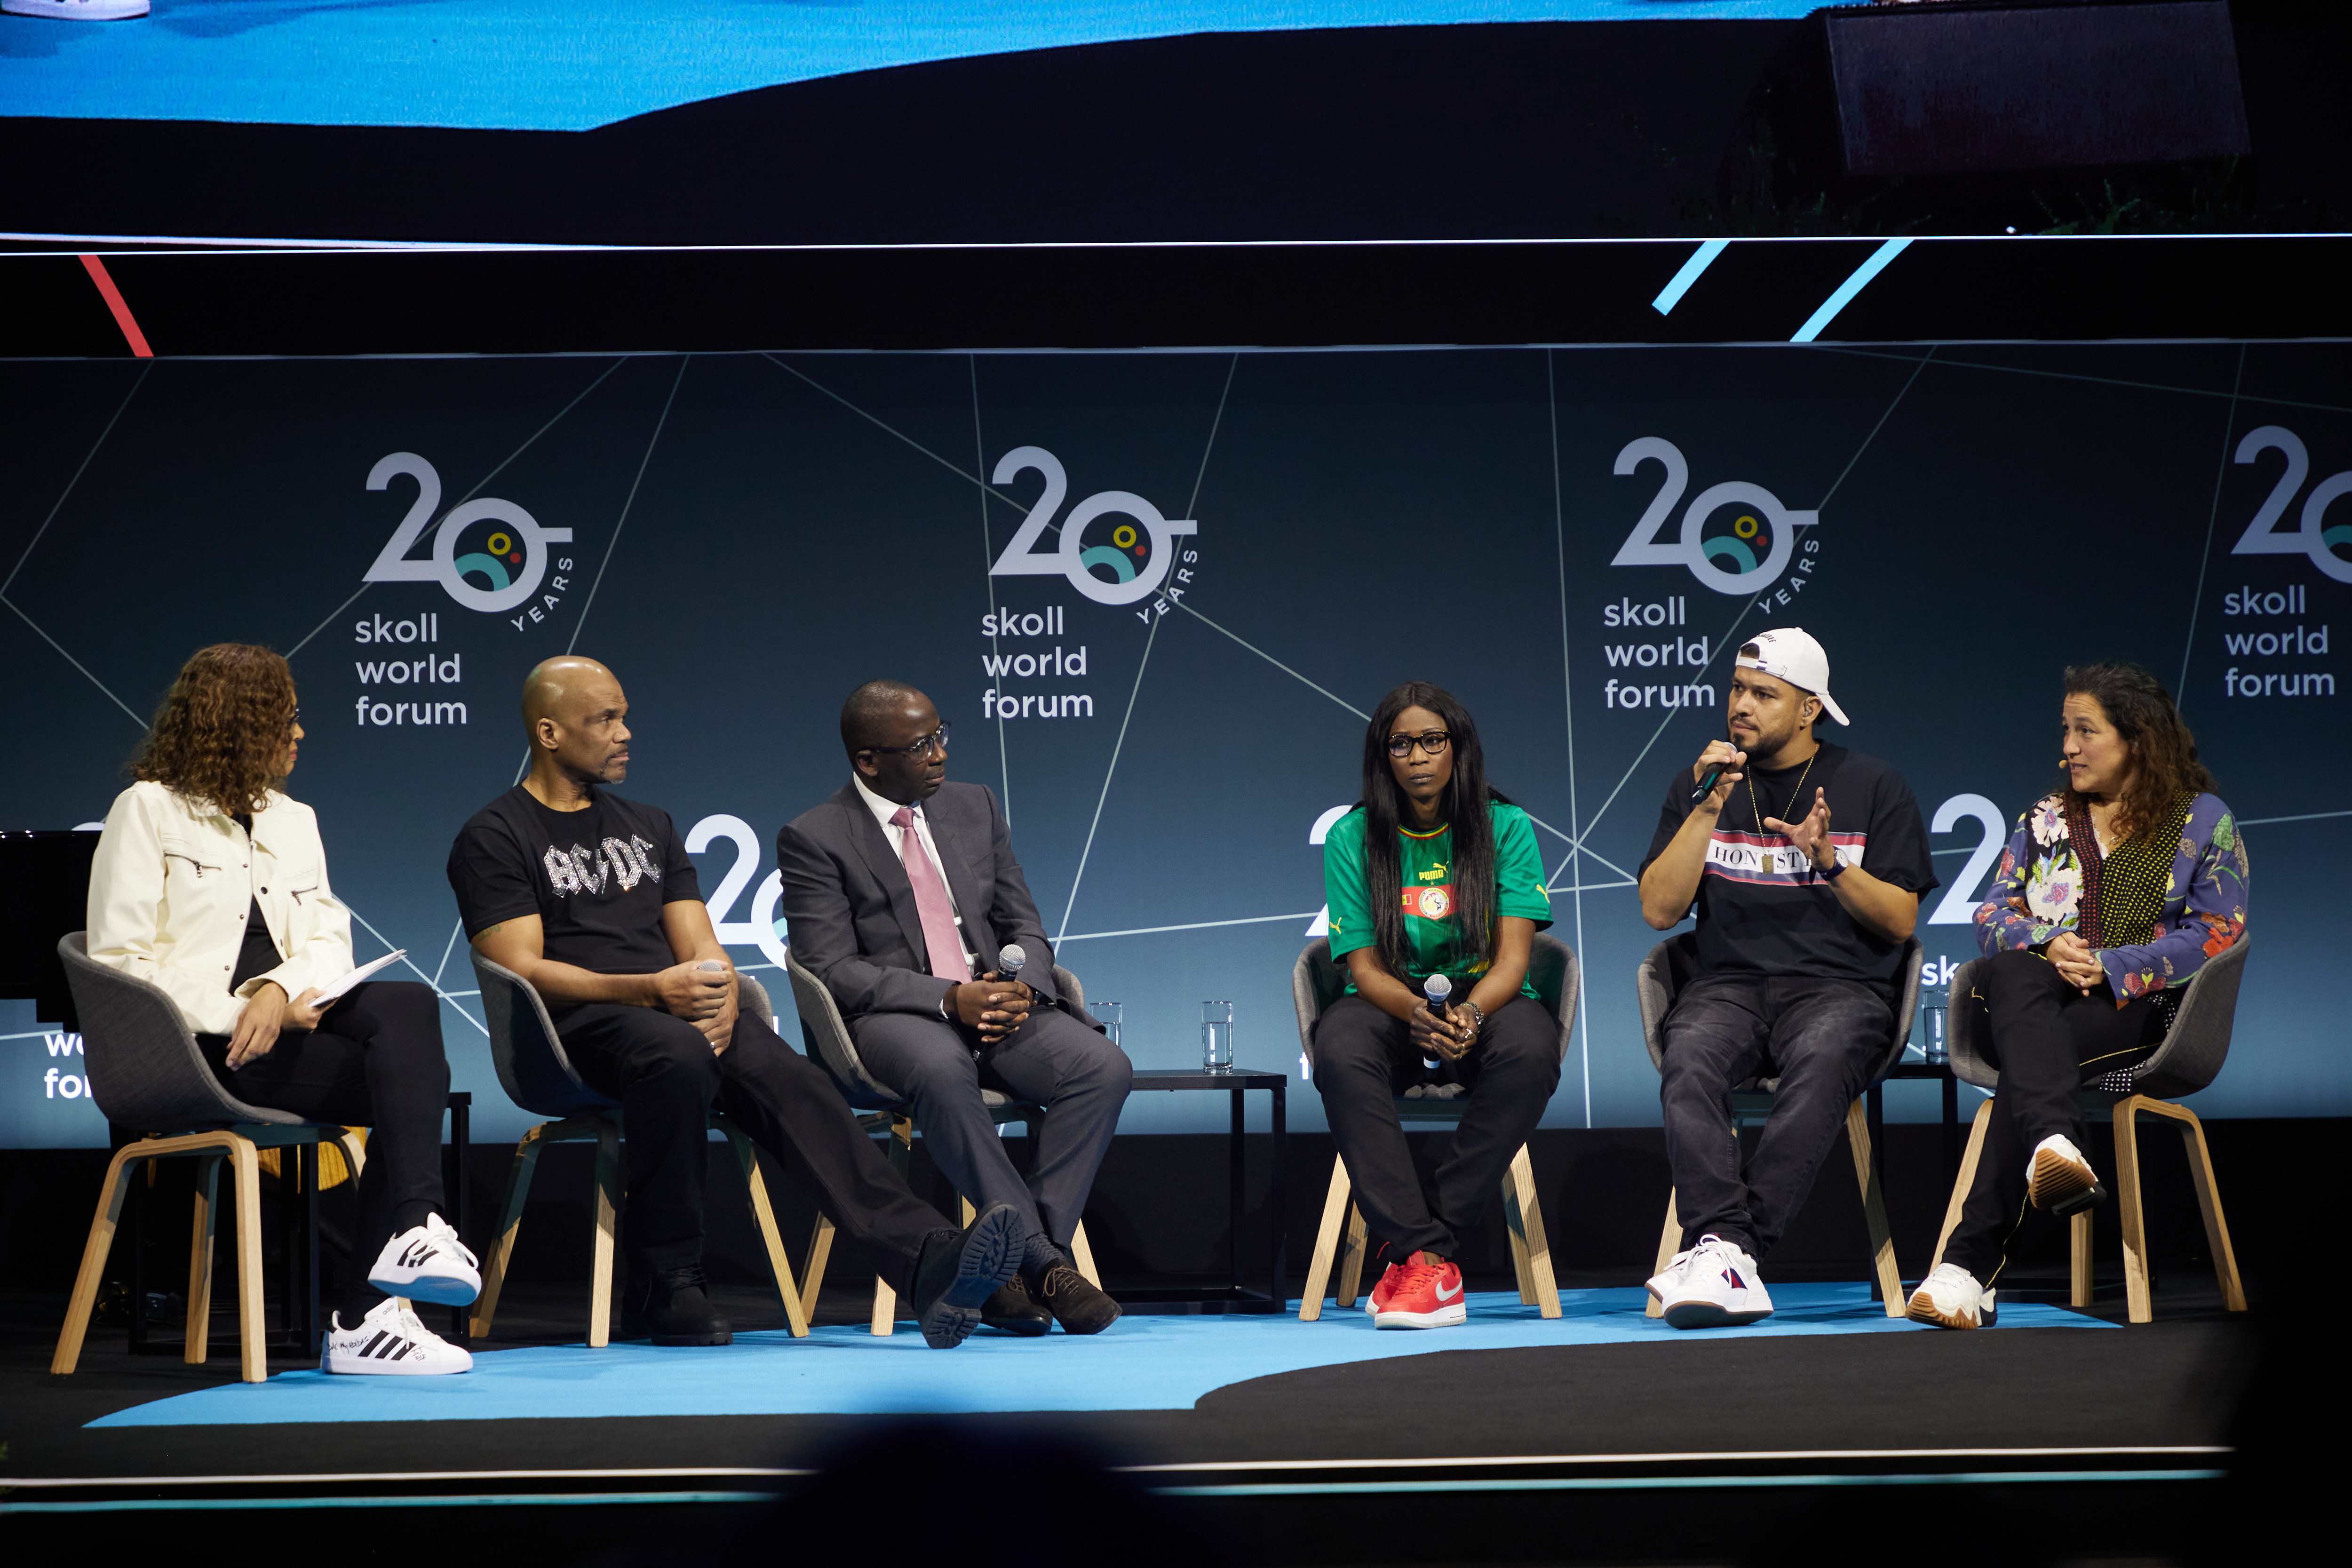 Six people are seated in row of chairs on a stage engaged in a panel discussion.